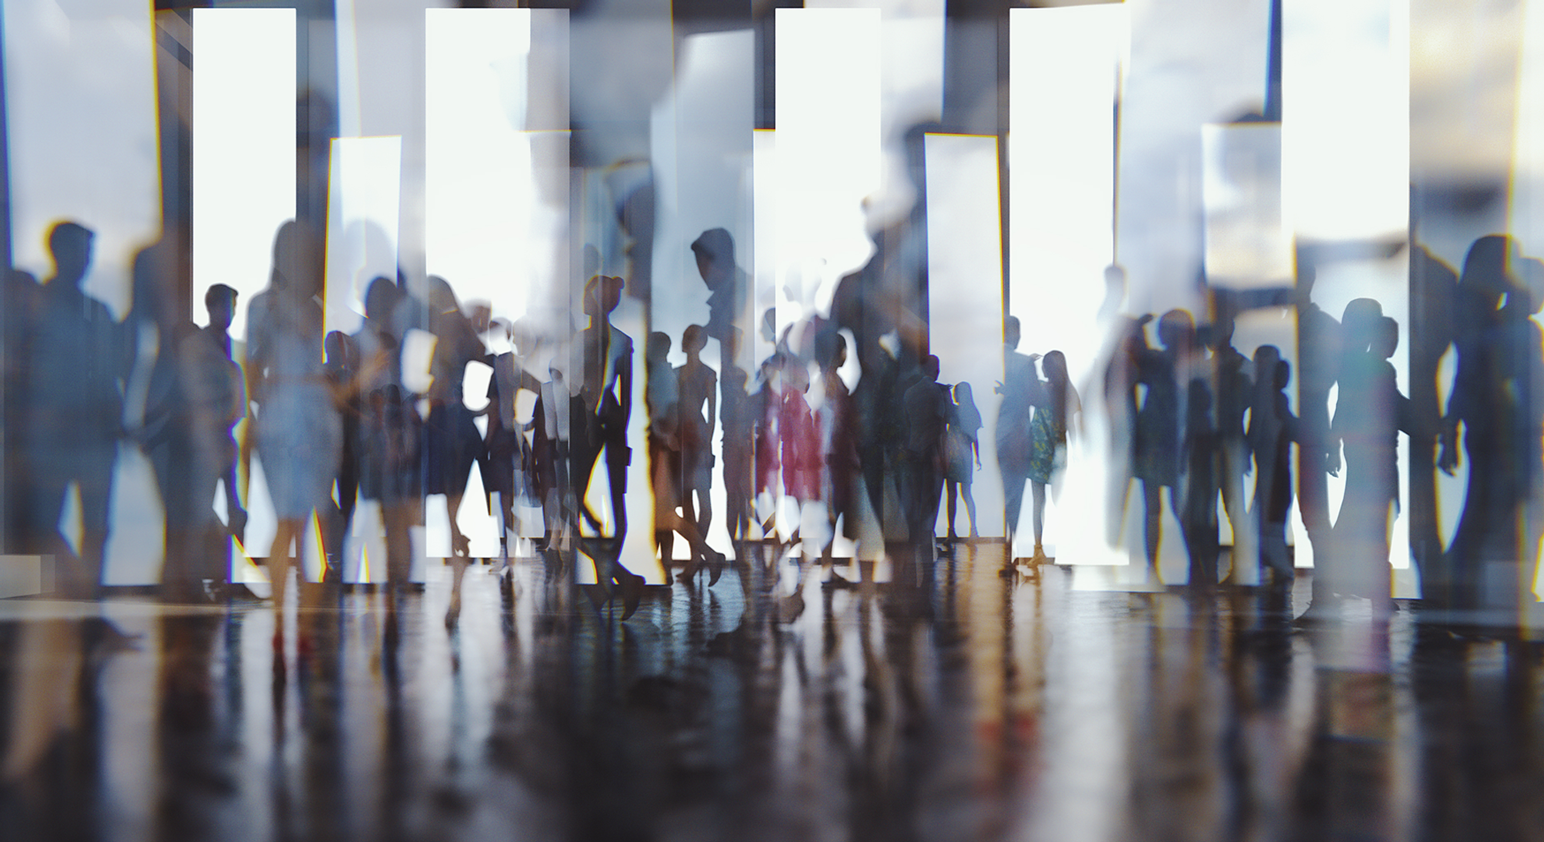 An abstract image showing lots of people